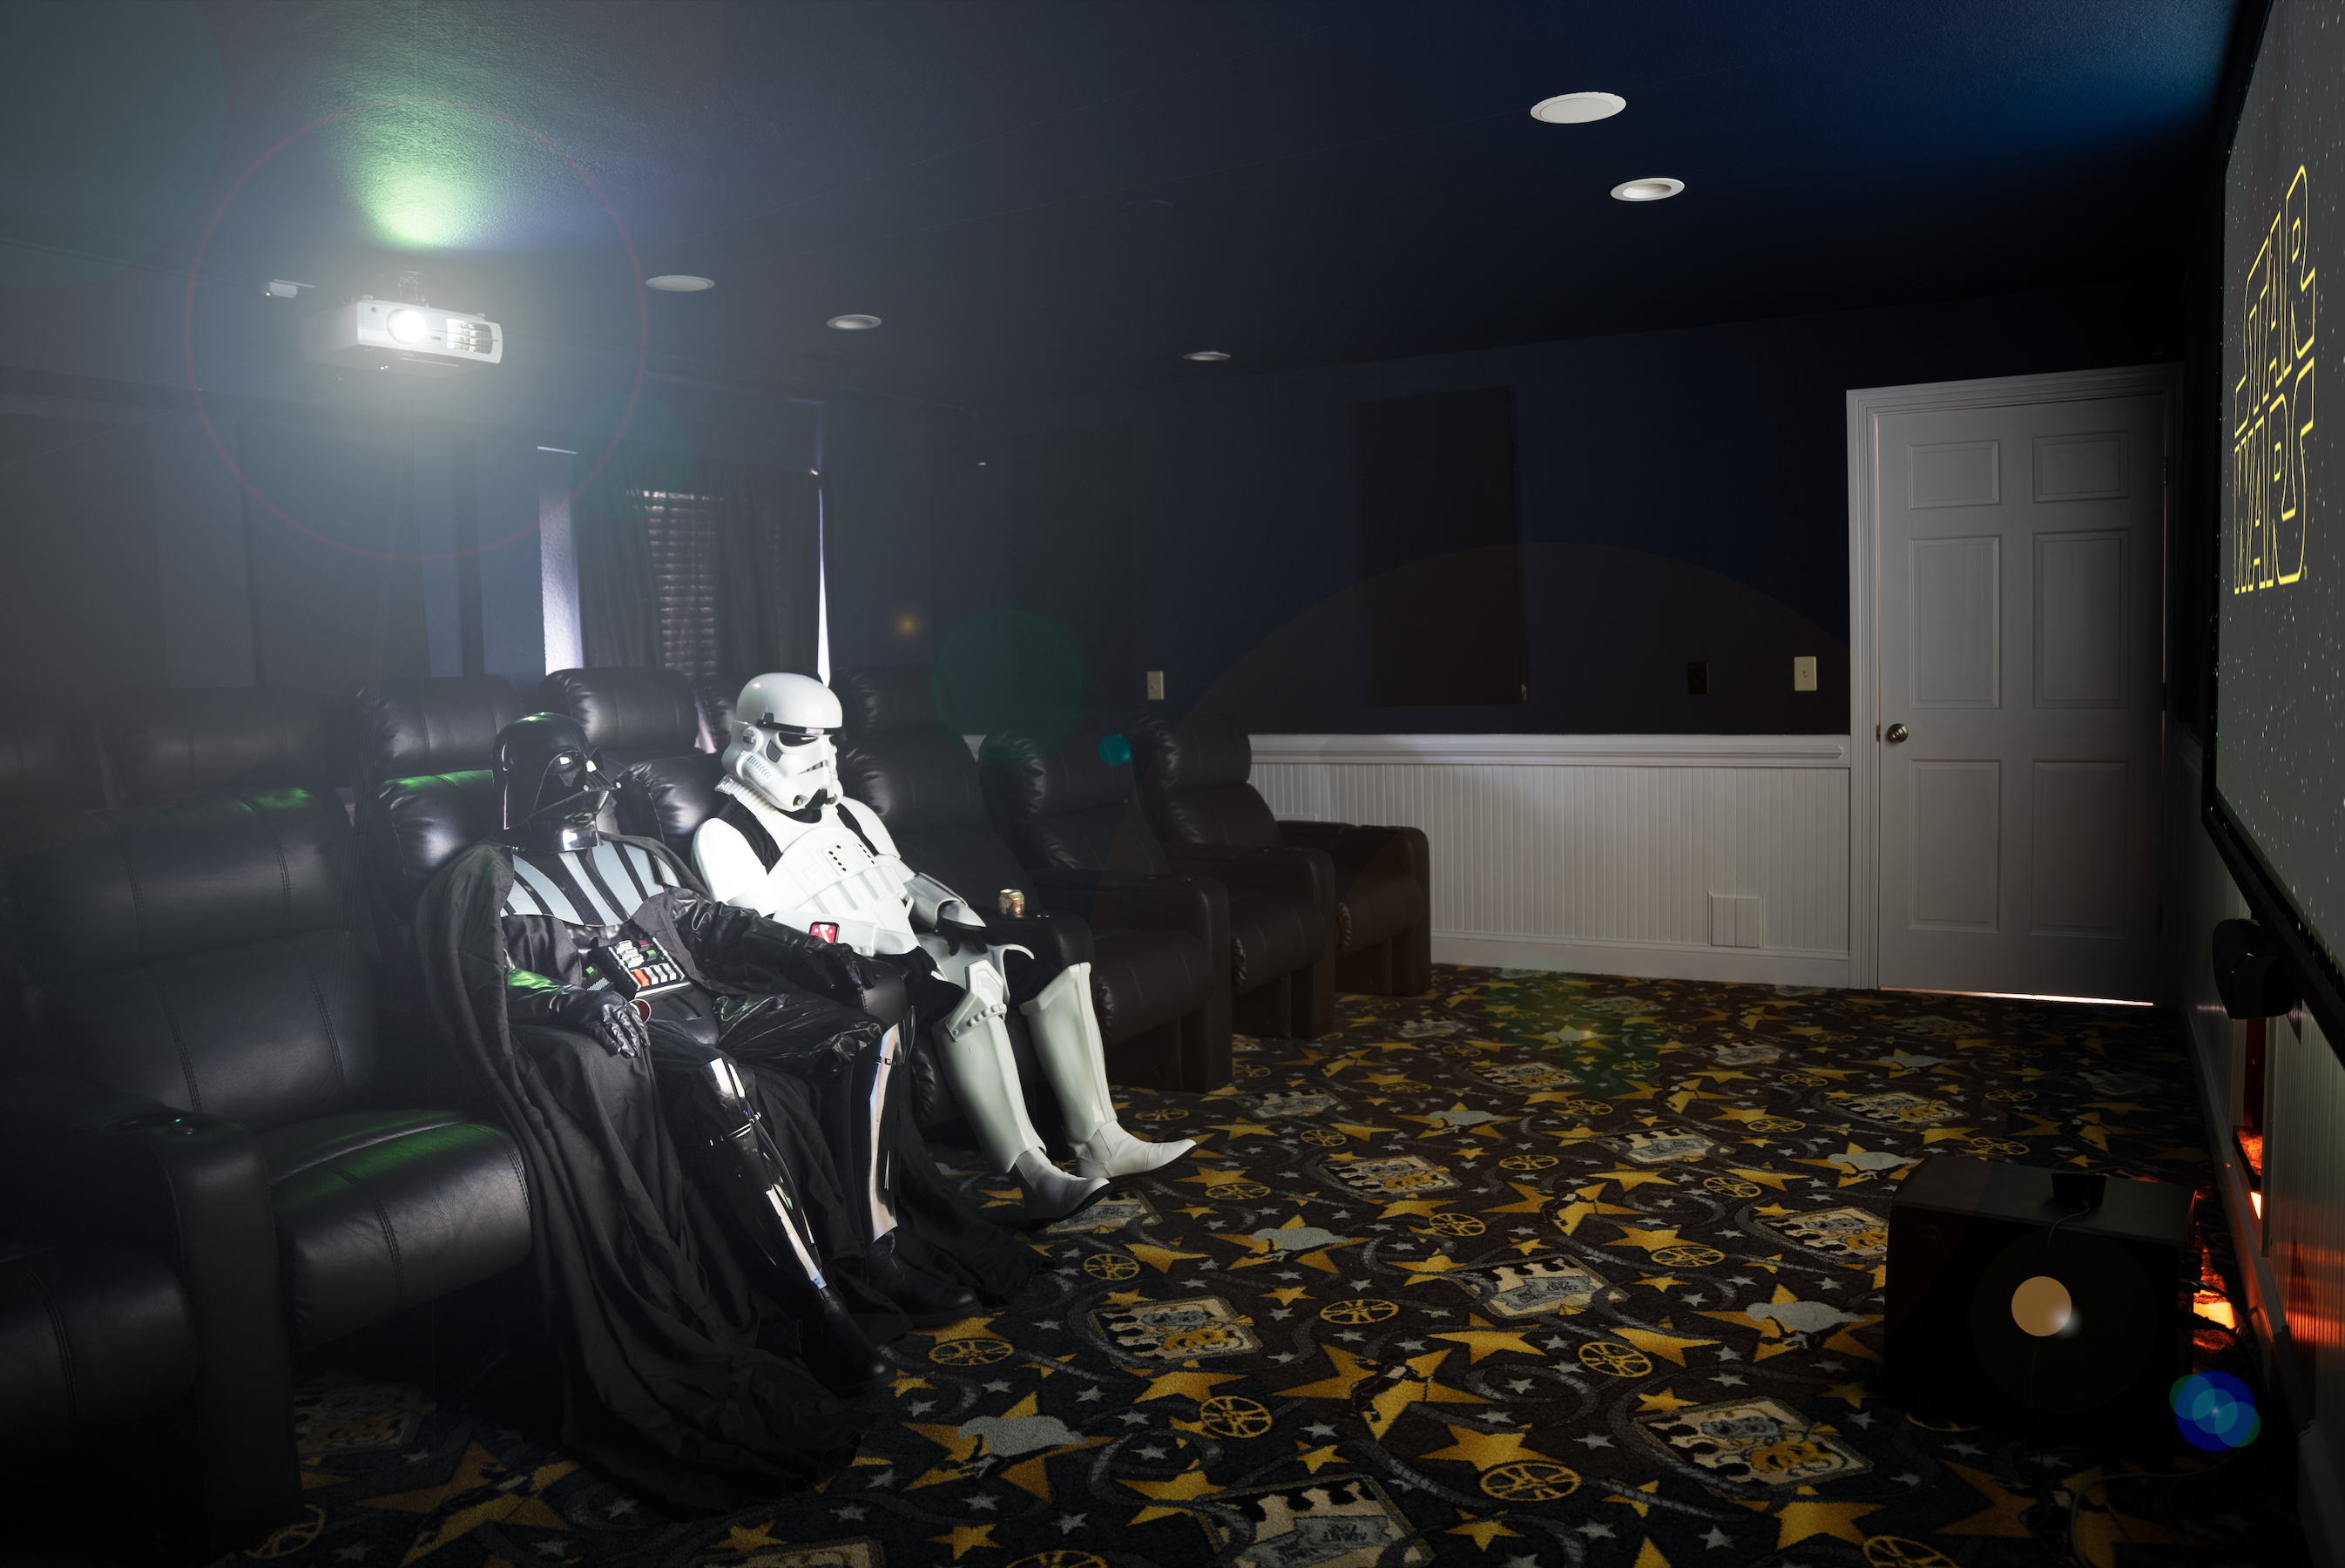 star wars - Top 6 Outer Banks Home Theater Rooms